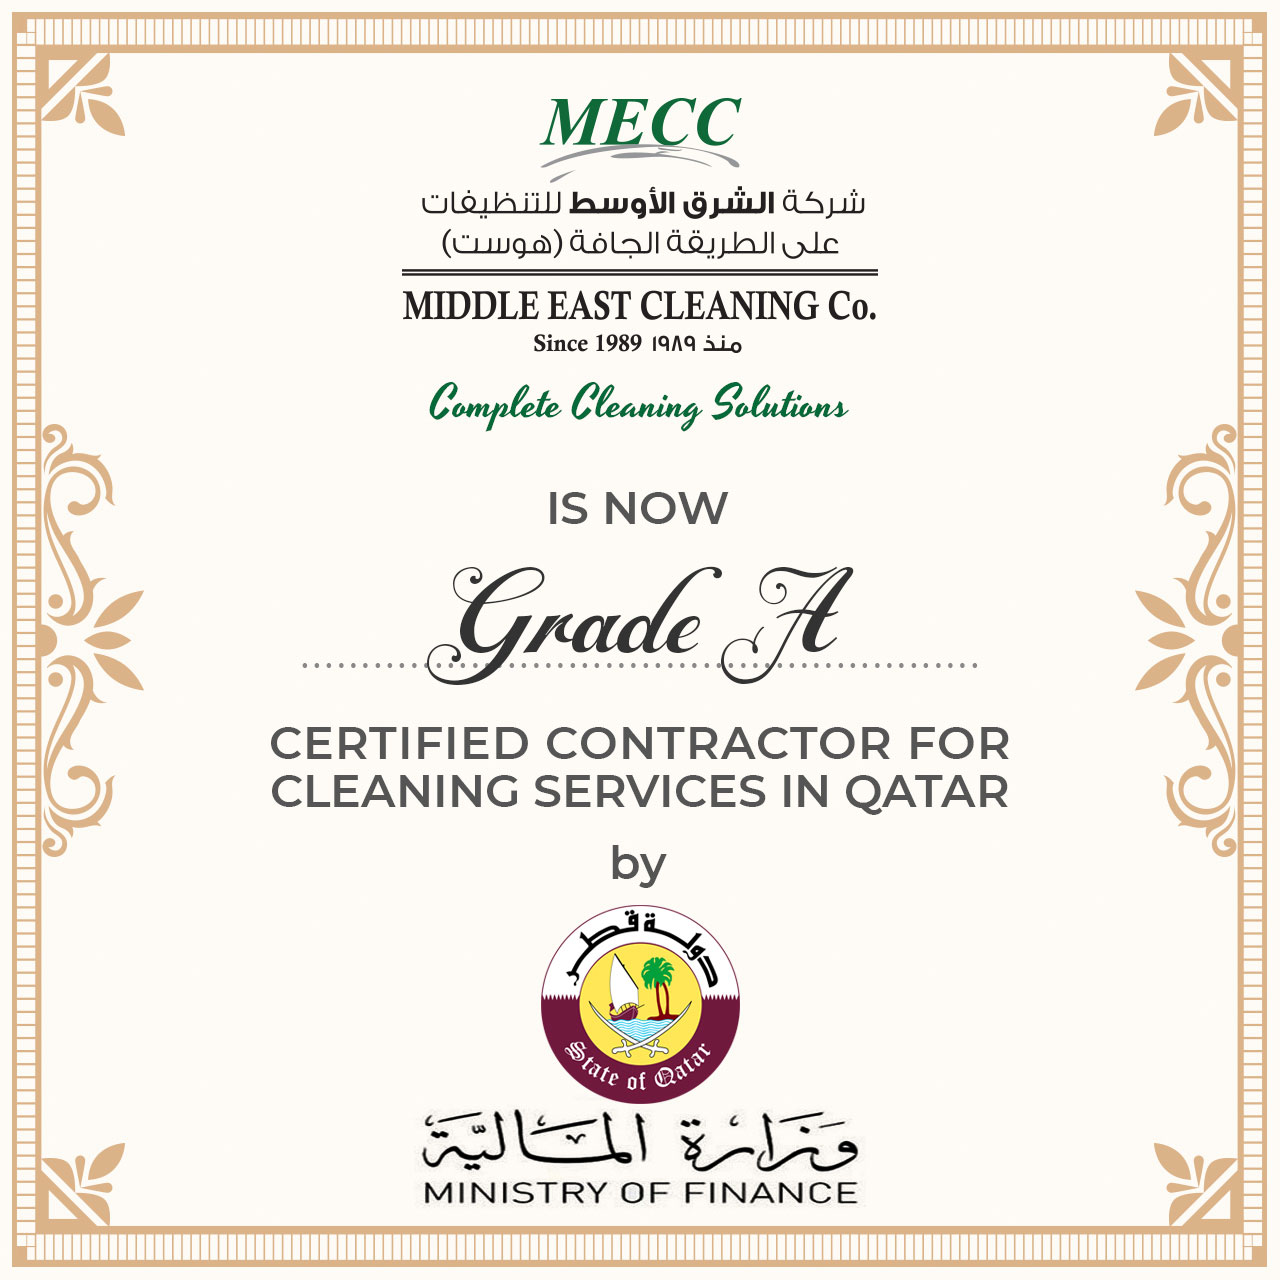 Best Cleaning Services Company in Doha, Qatar